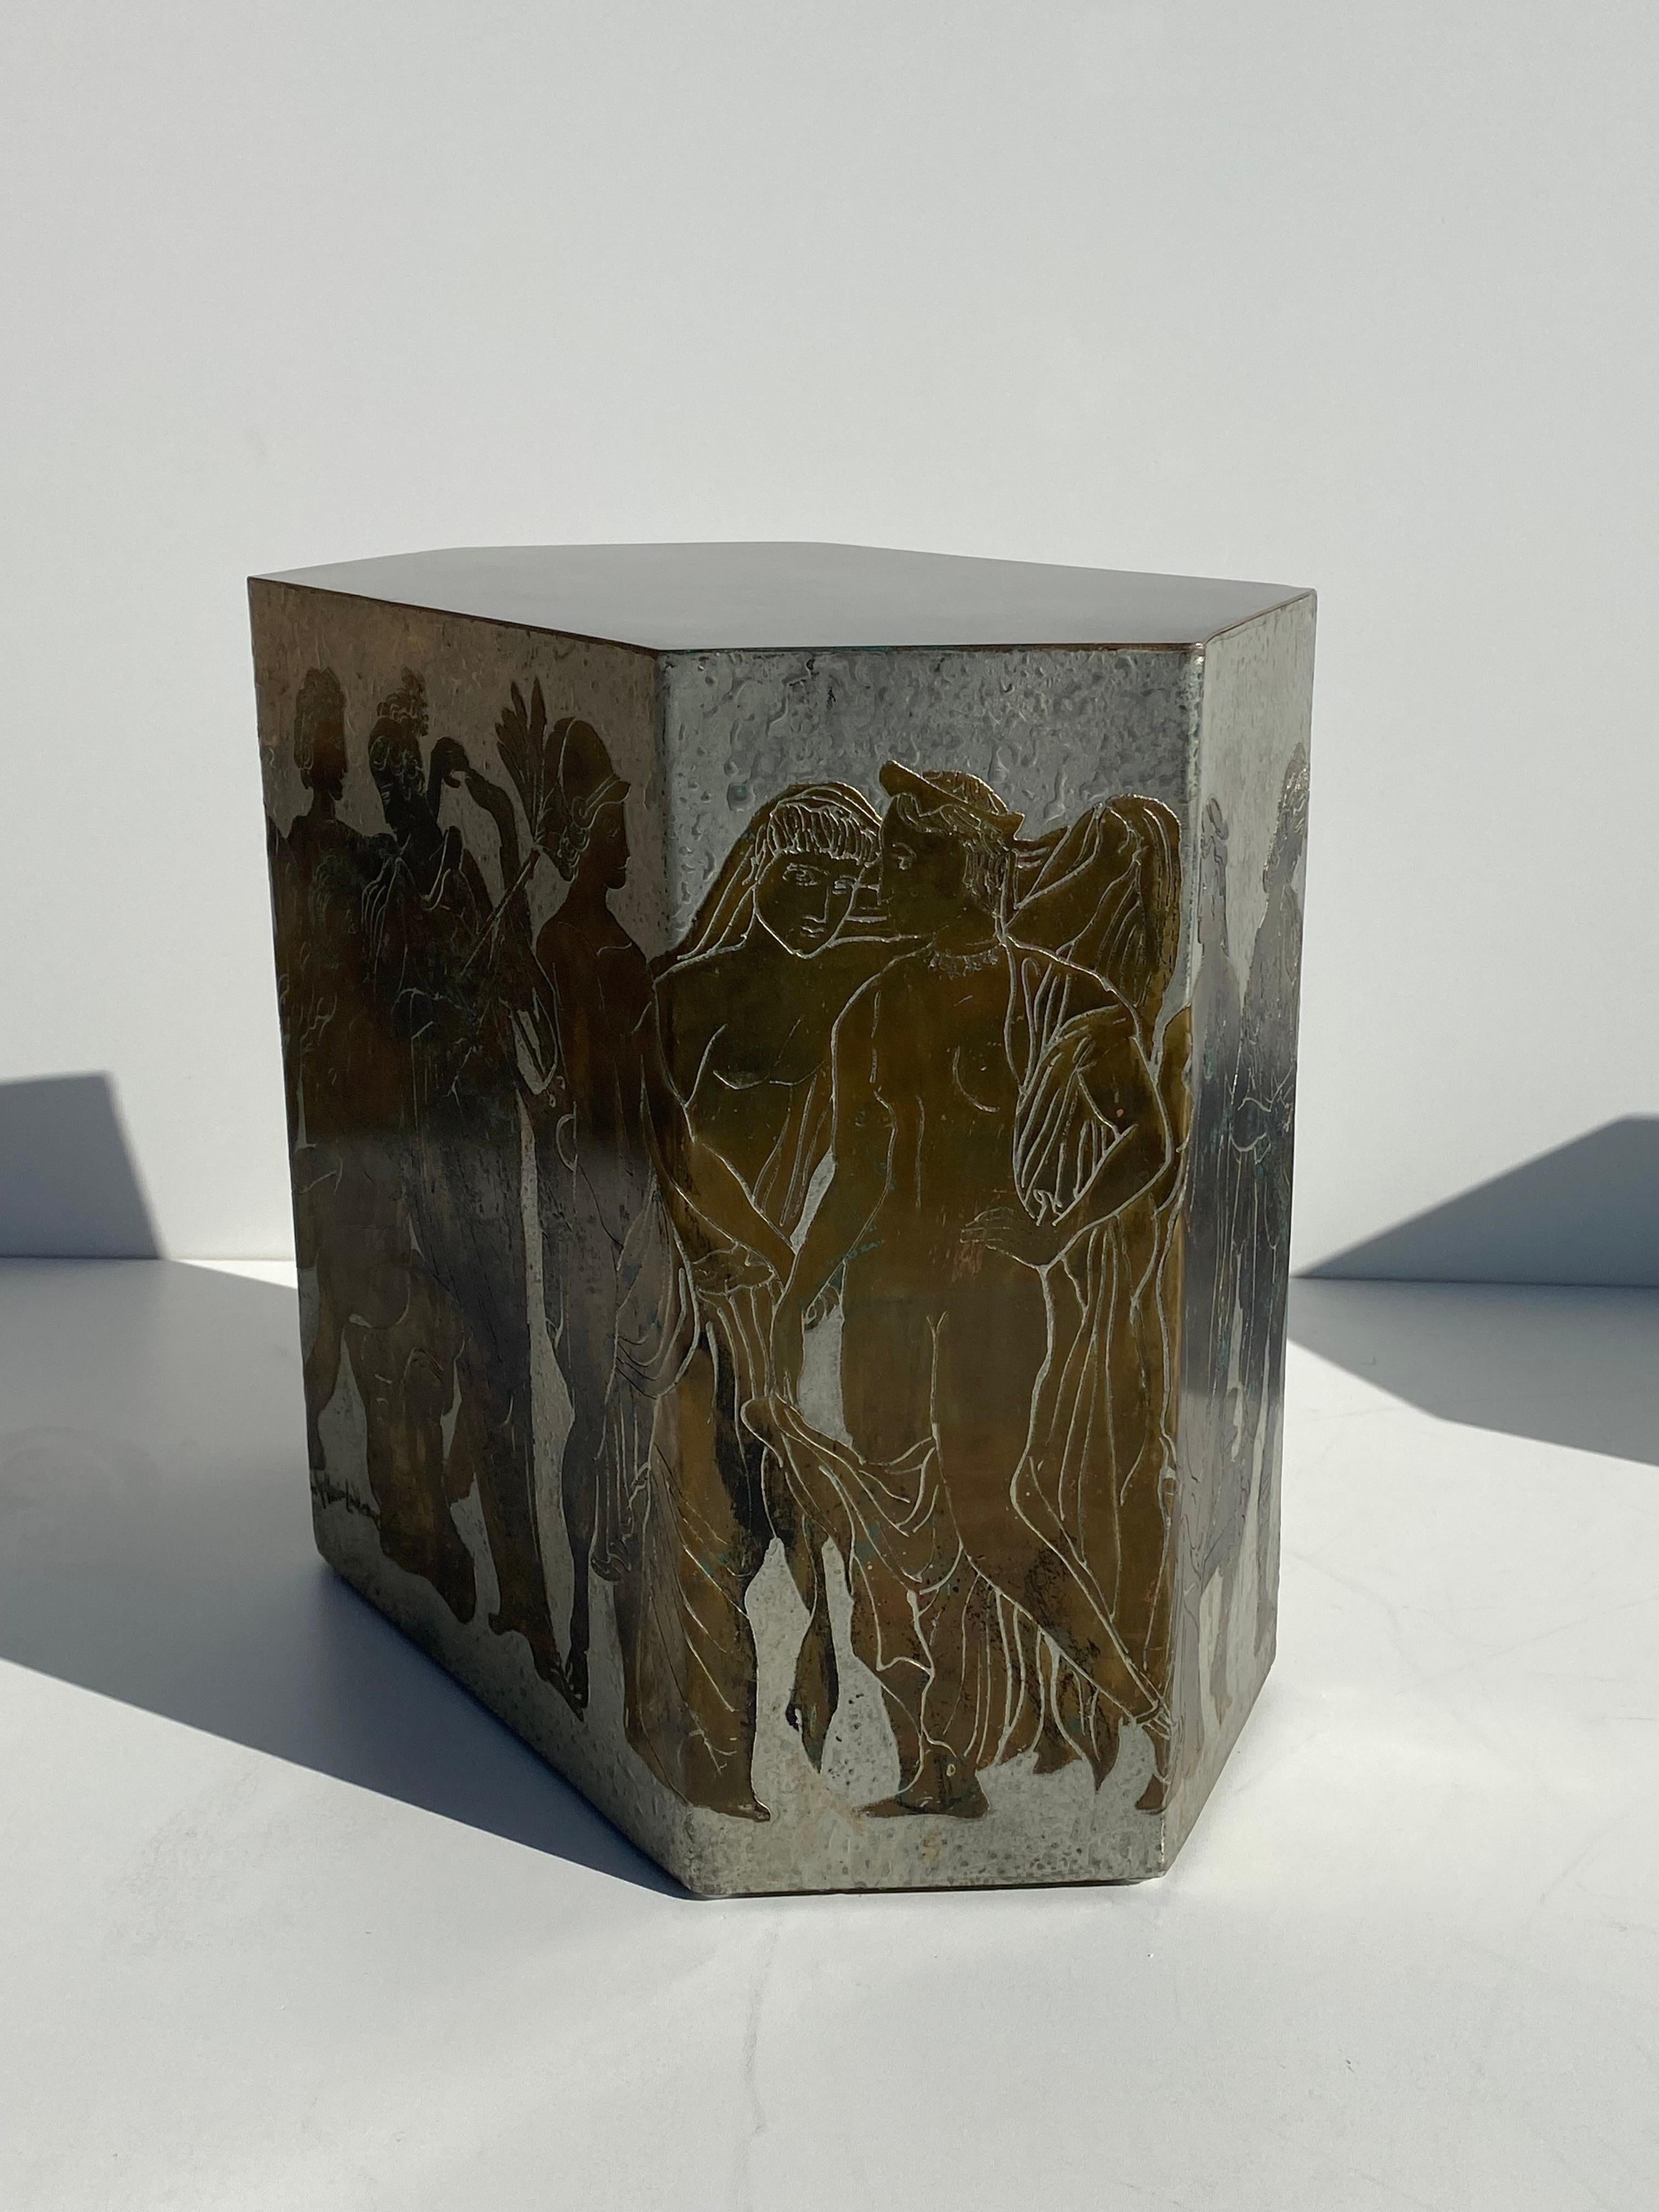 Etched Rare “Romanesque” Side Tables by LaVerne